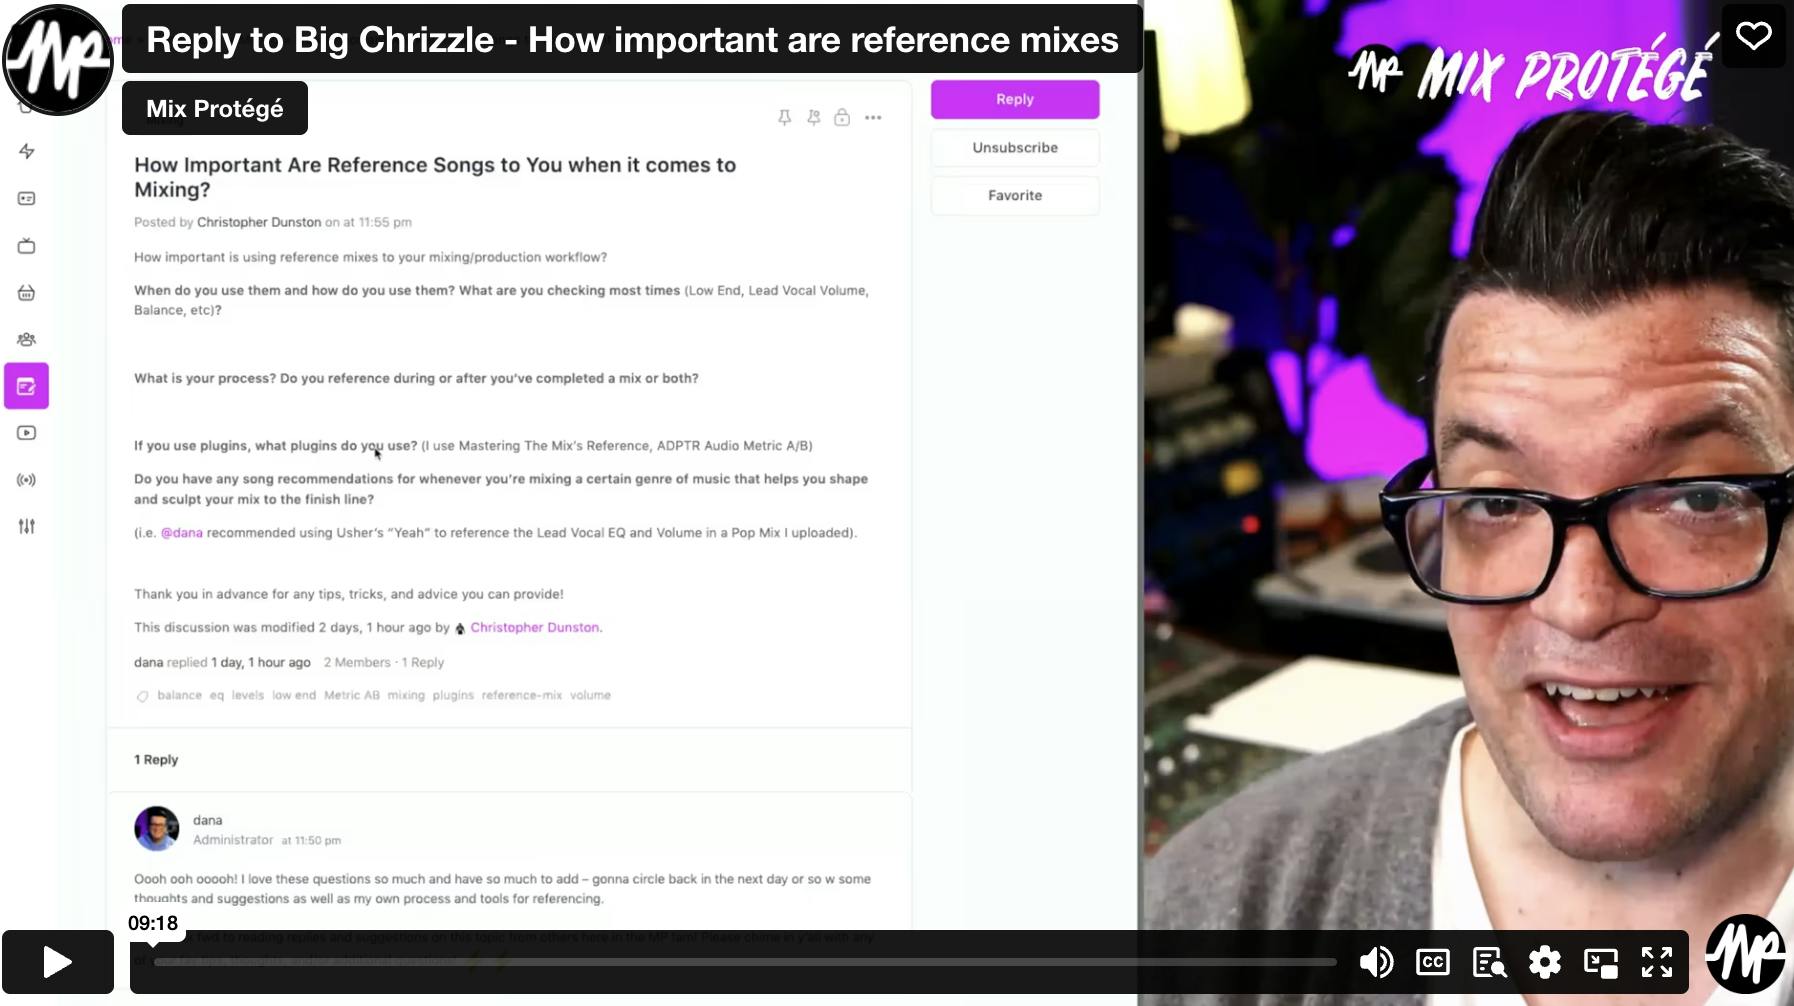 Video screenshot of Dana answering member questions about reference mixes